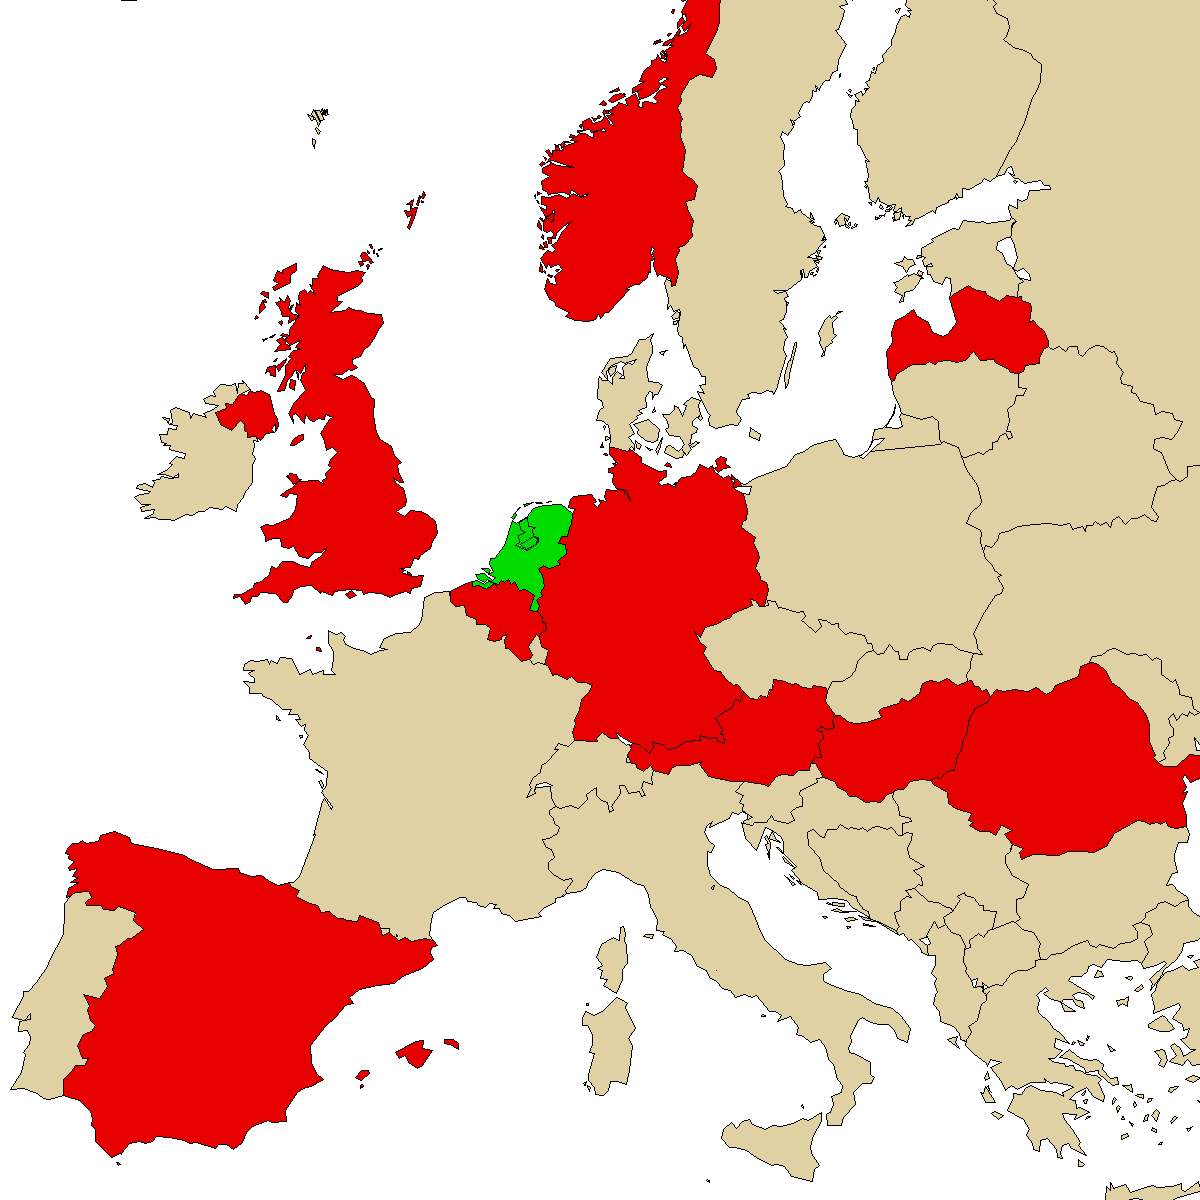 legal info map for our product 3FMA, green are countries where we found no ban, red with ban, grey is unknown